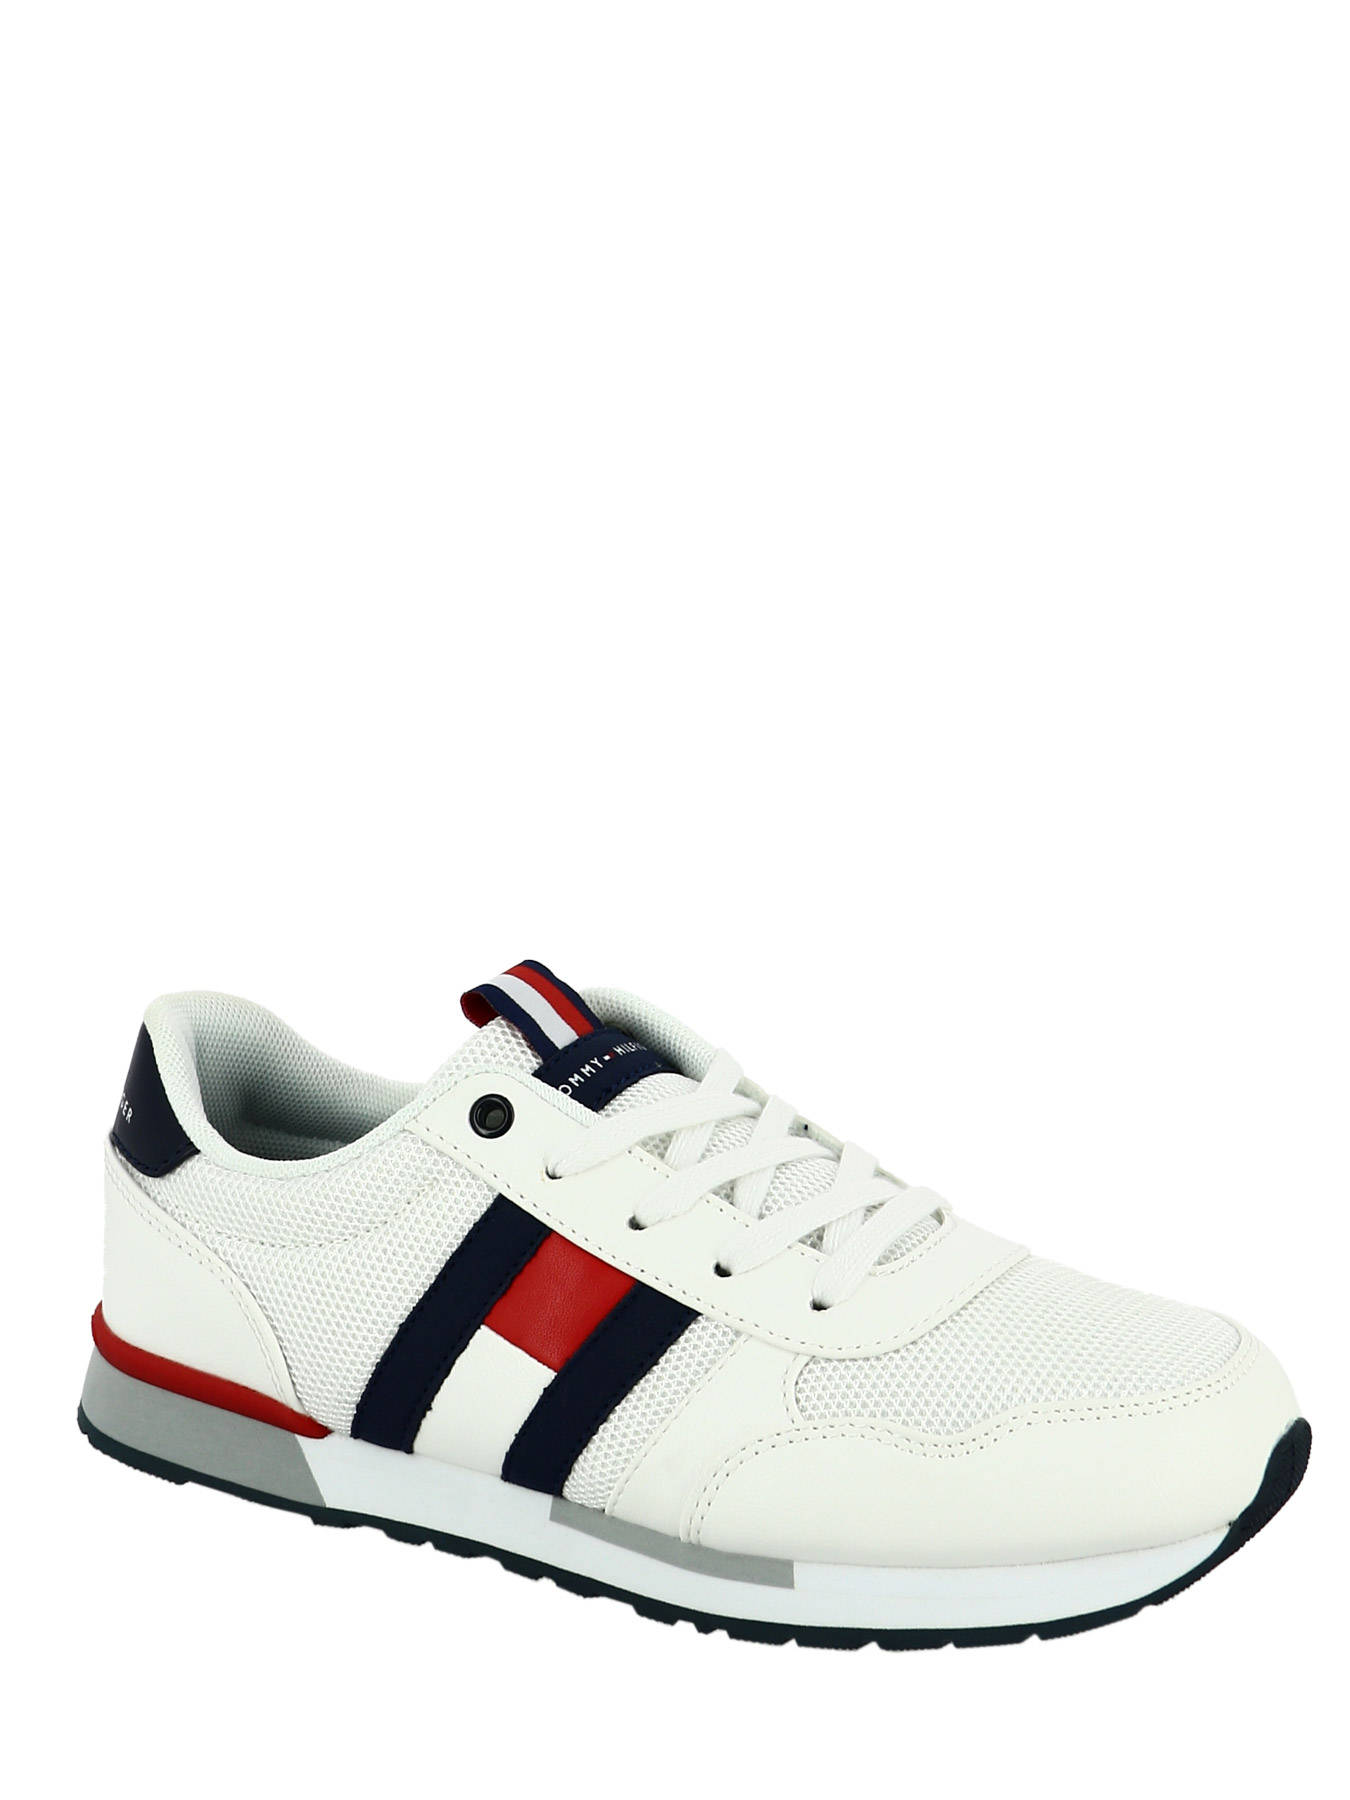 hilfiger shoes price